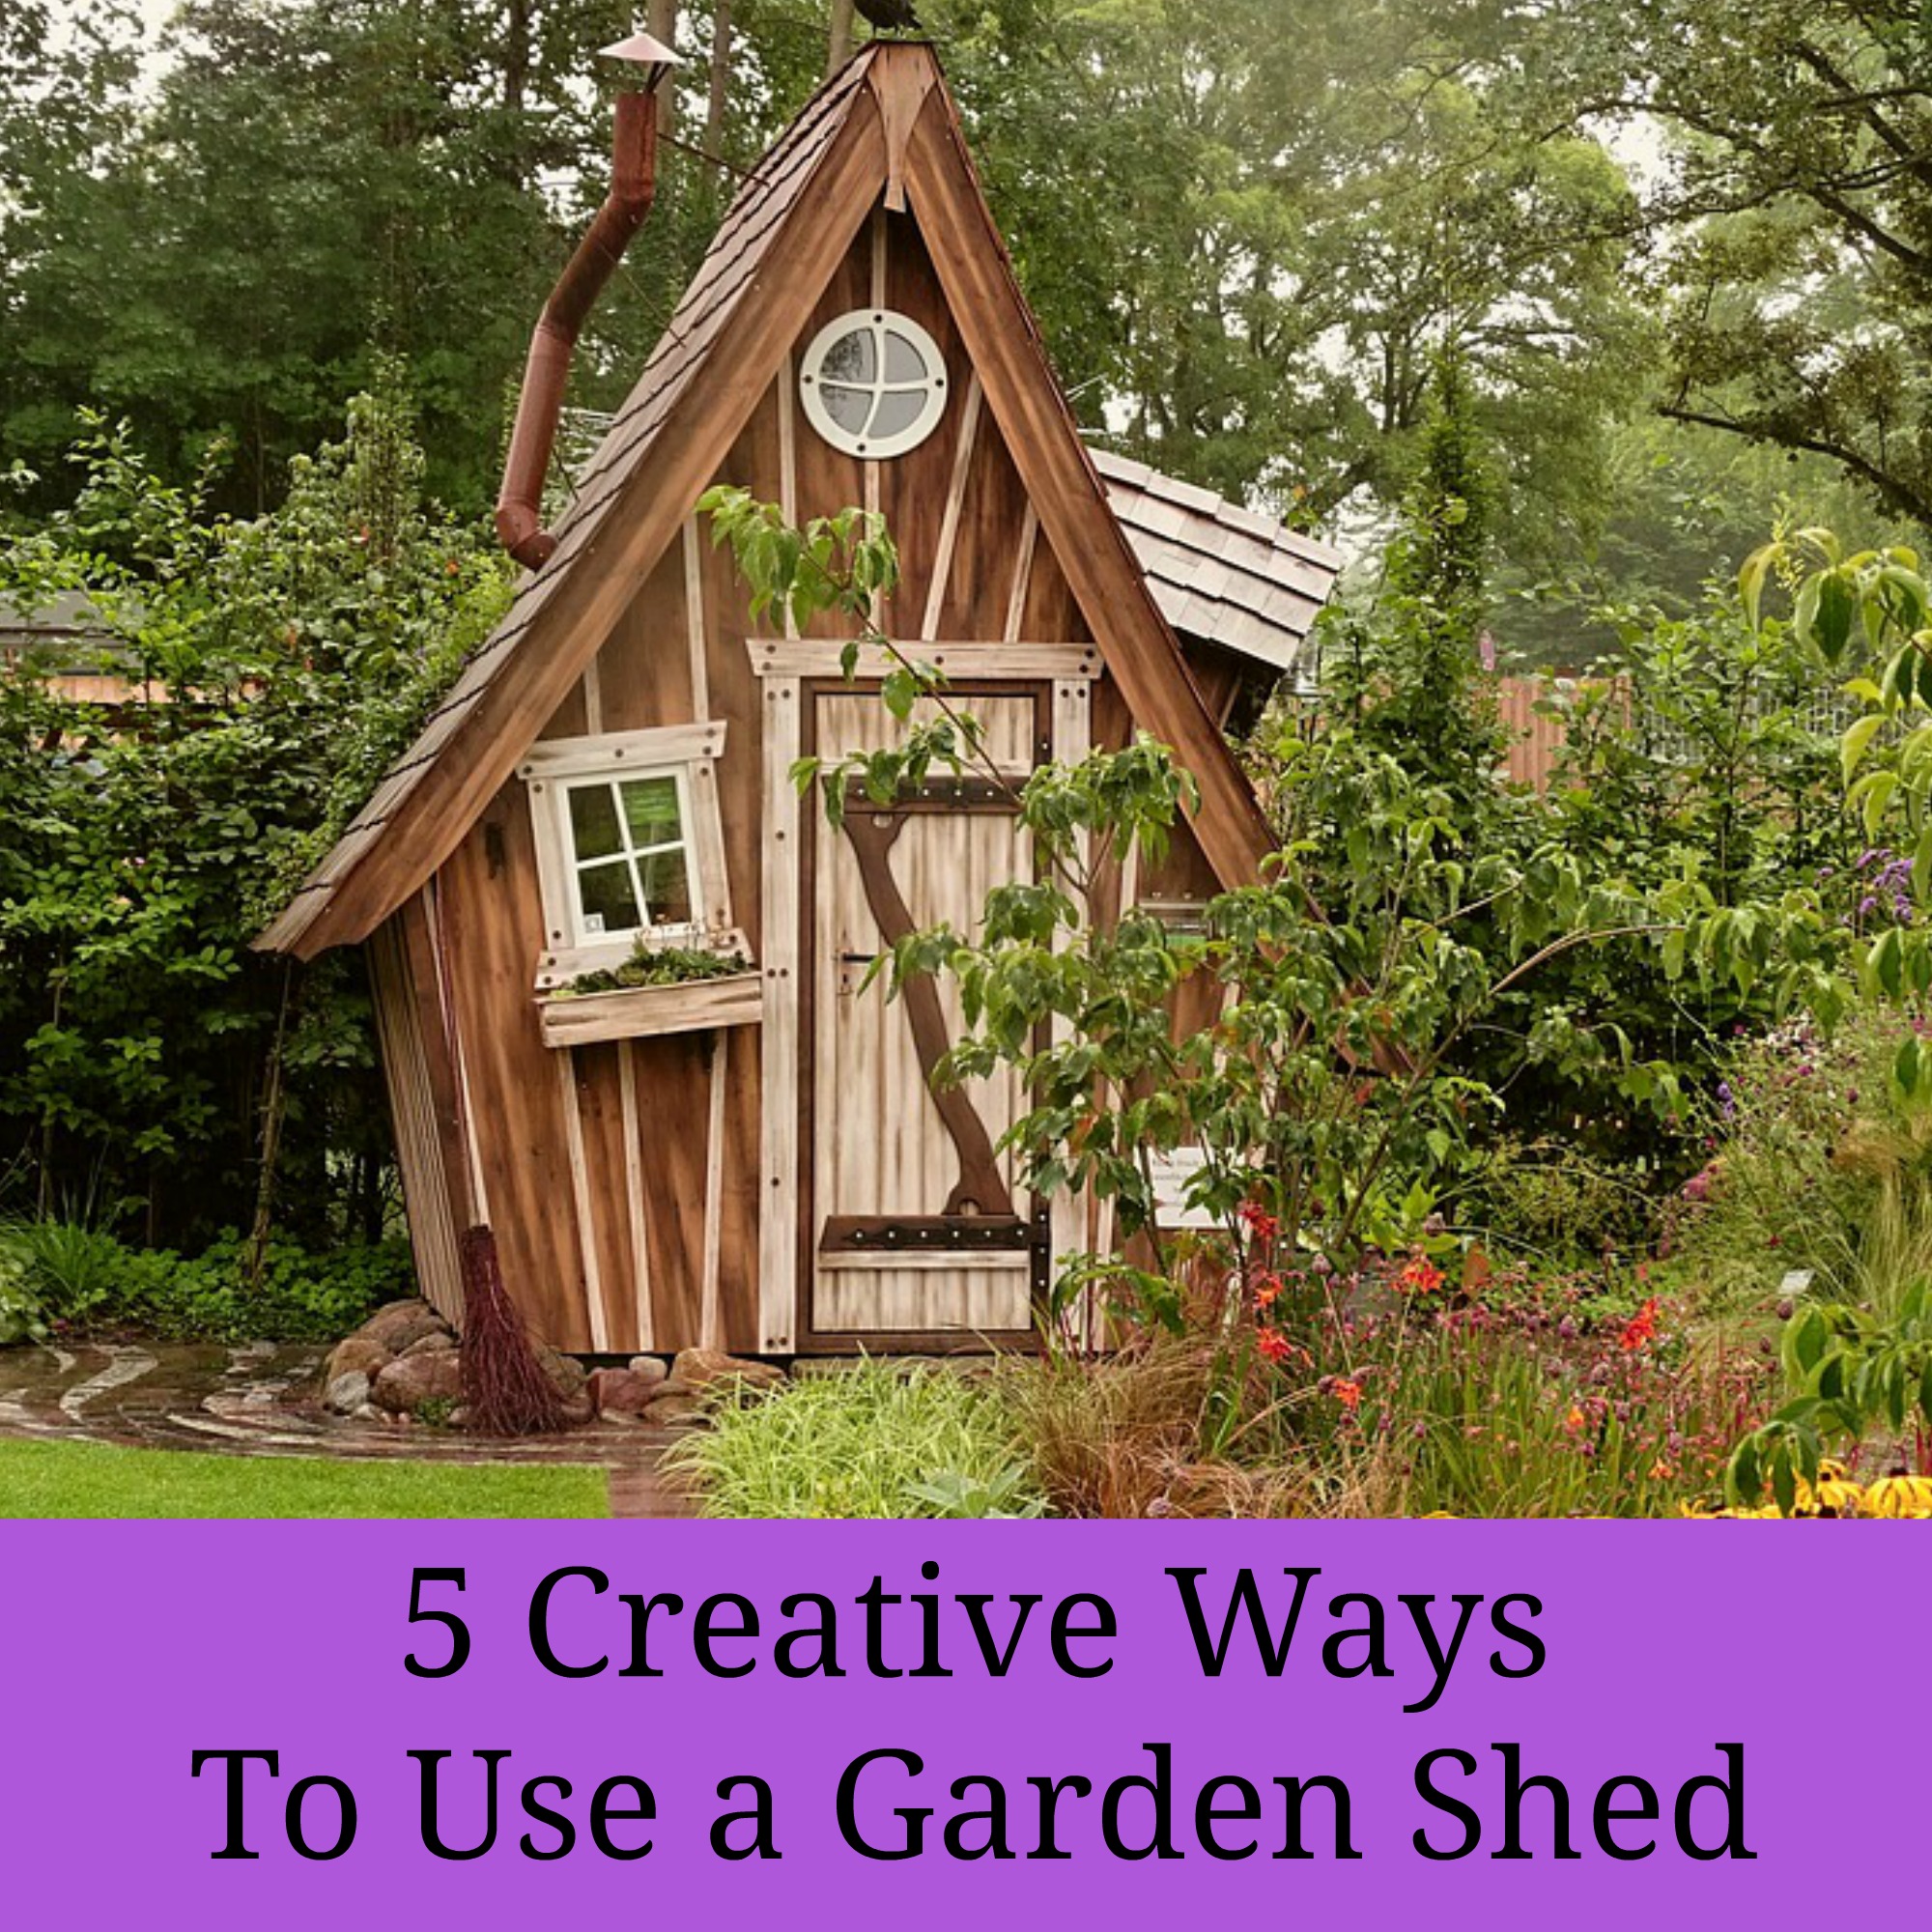 5 Creative Ways To Use a Garden Shed - A Nation of Moms